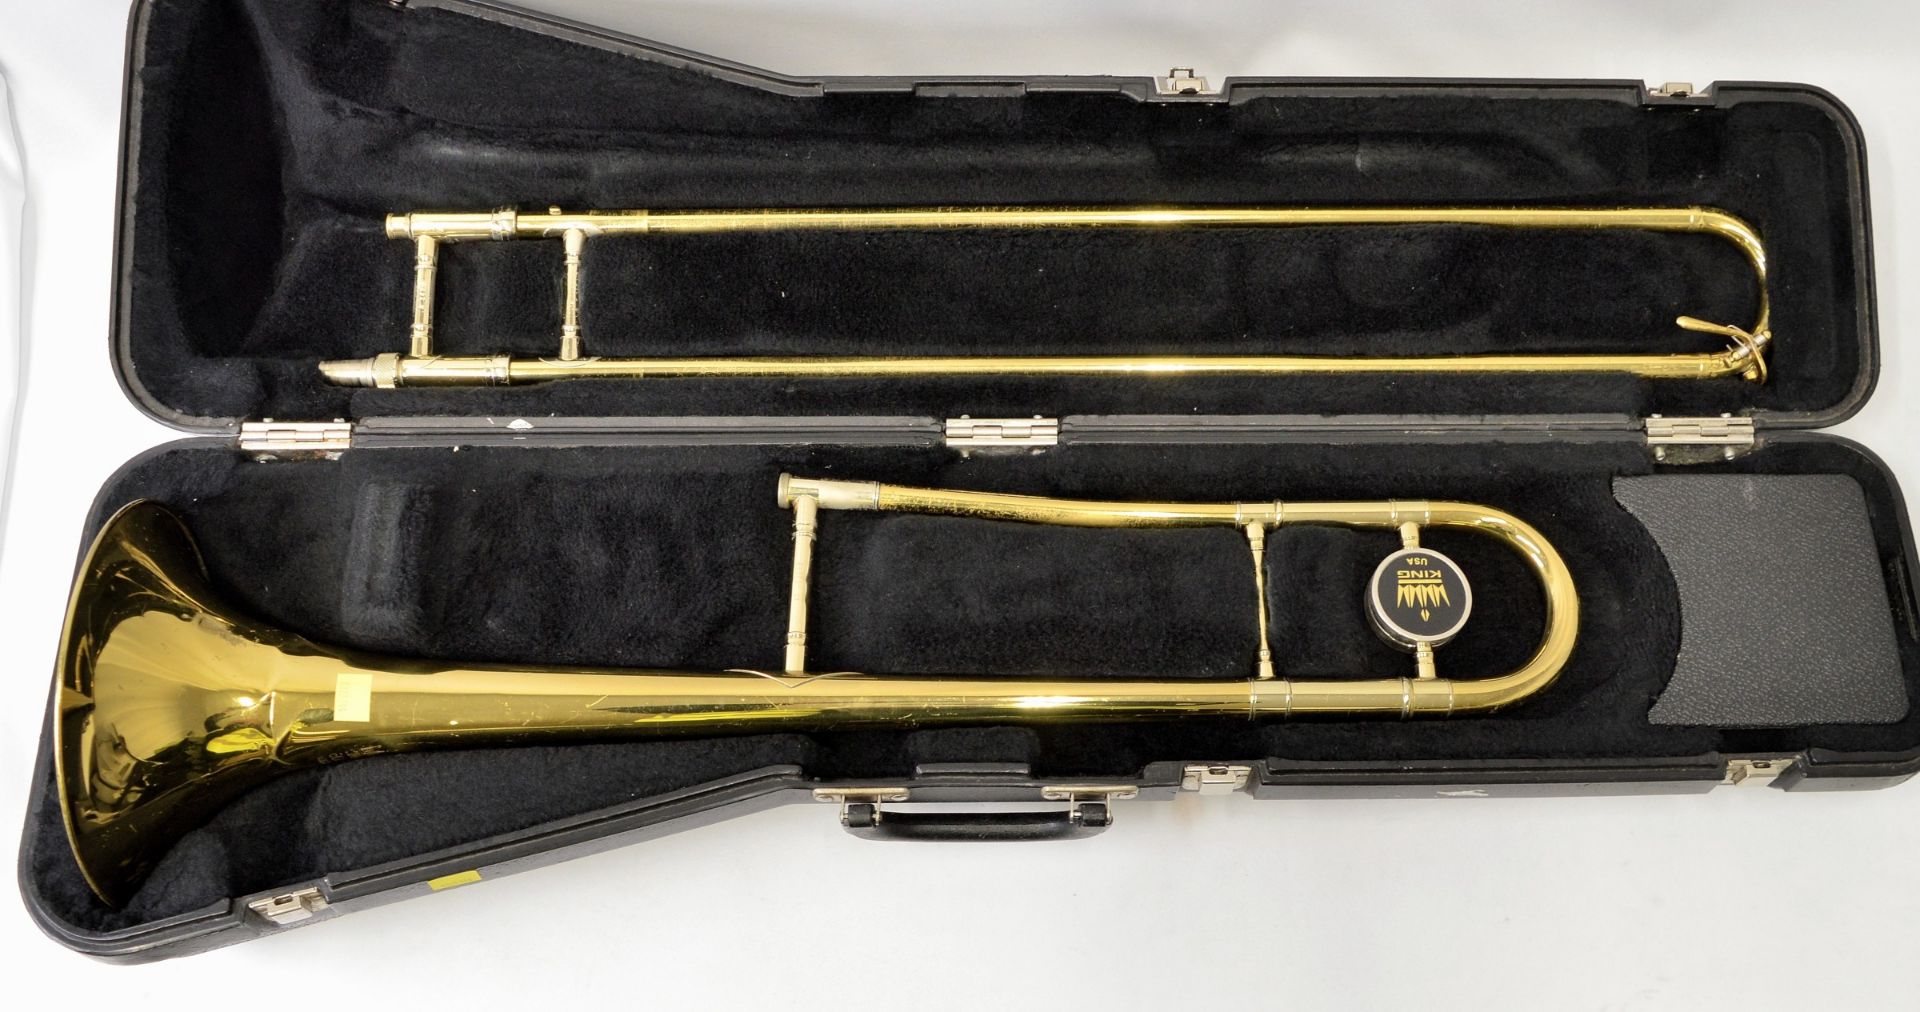 King Model 606 Trombone with Case. Damage to bell. Serial No. 483668 - A 1438. - Image 2 of 18